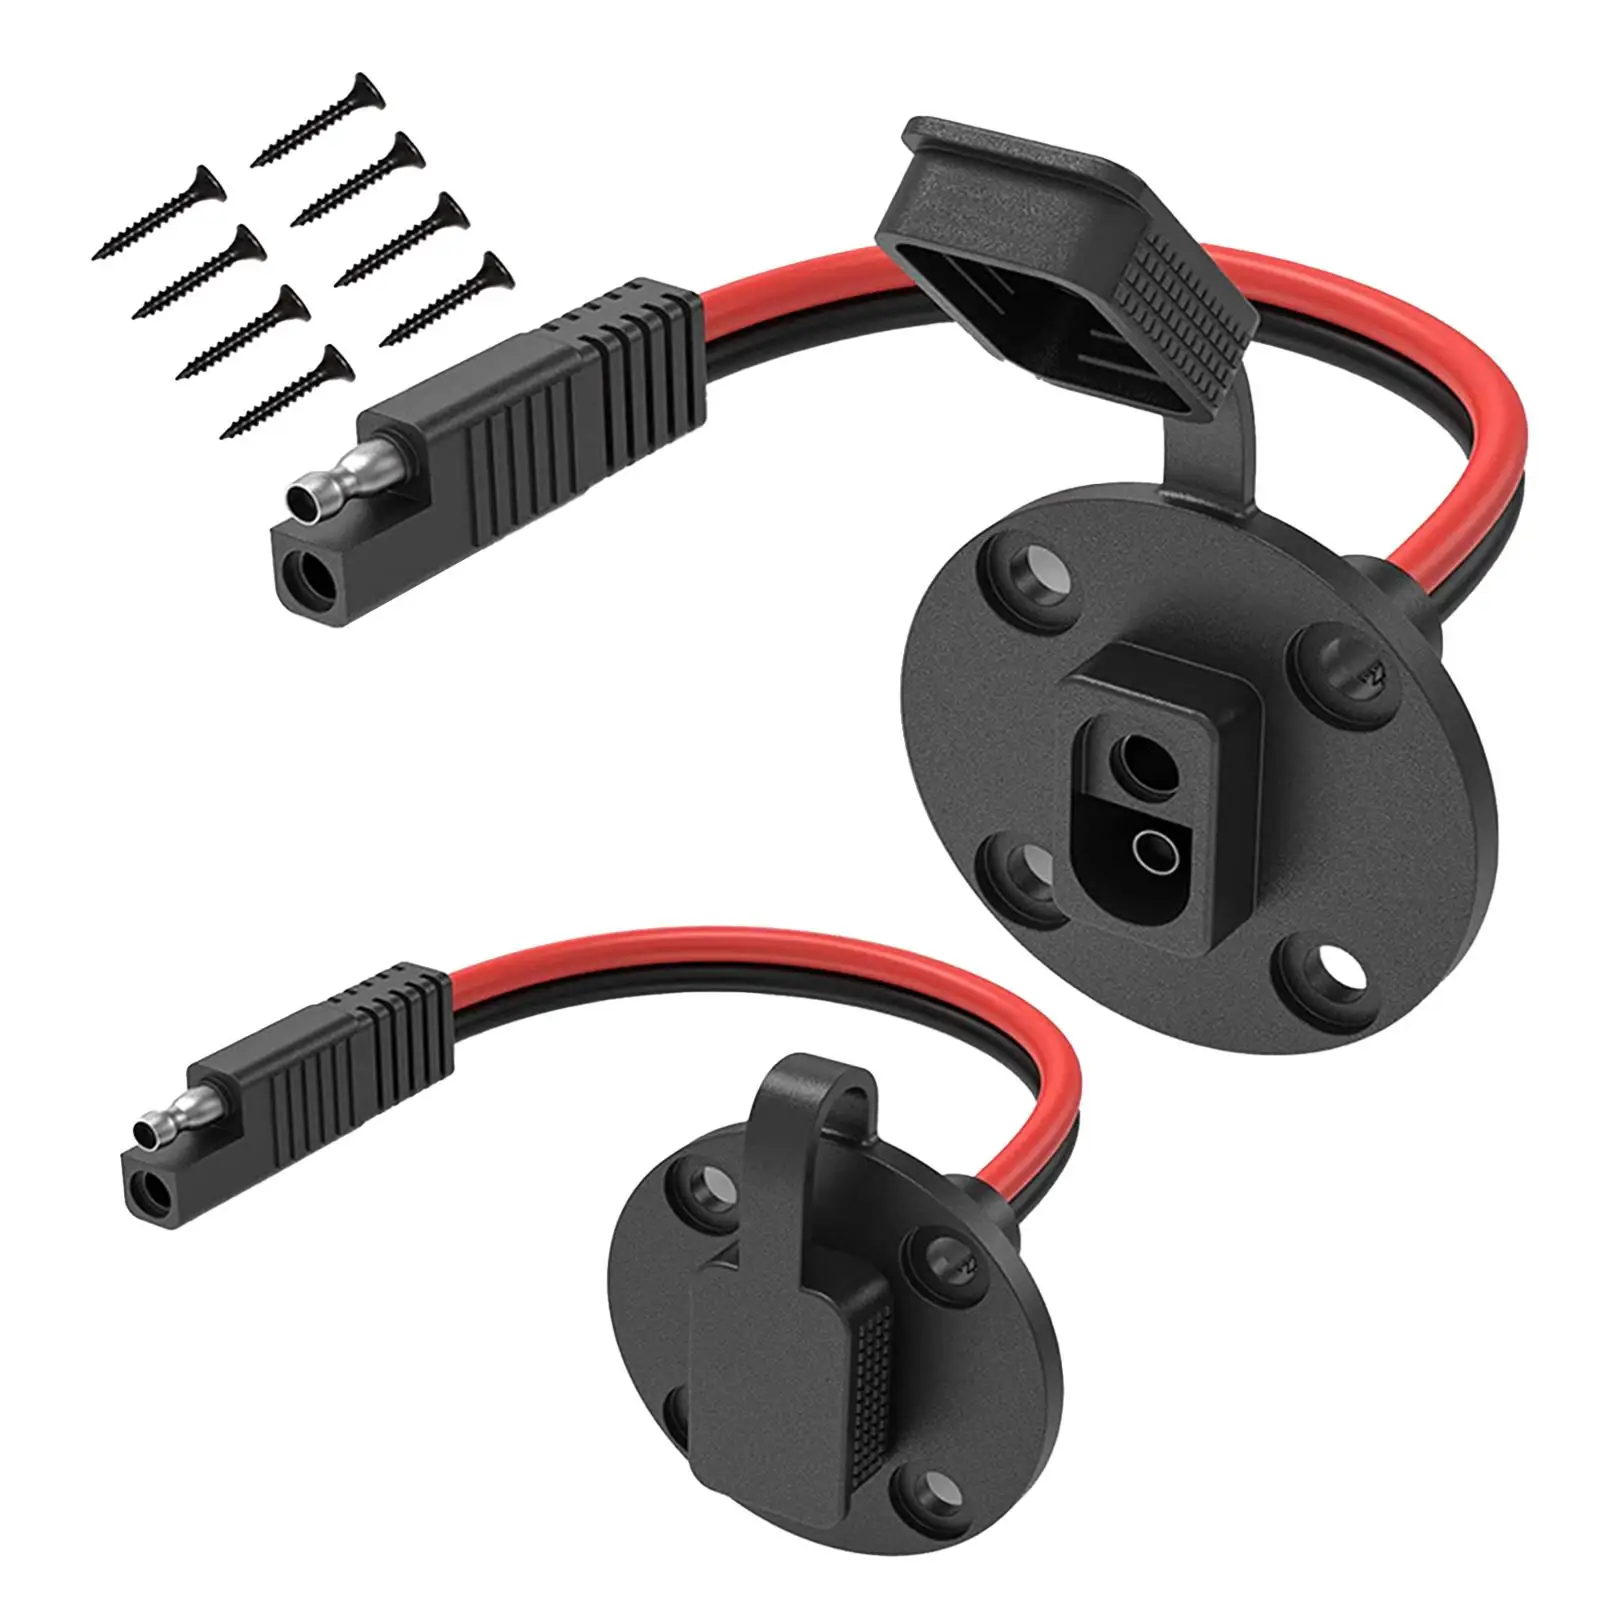 2 Pieces SAE Socket Quick Connector Accessory Waterproof Cap Extension Cord